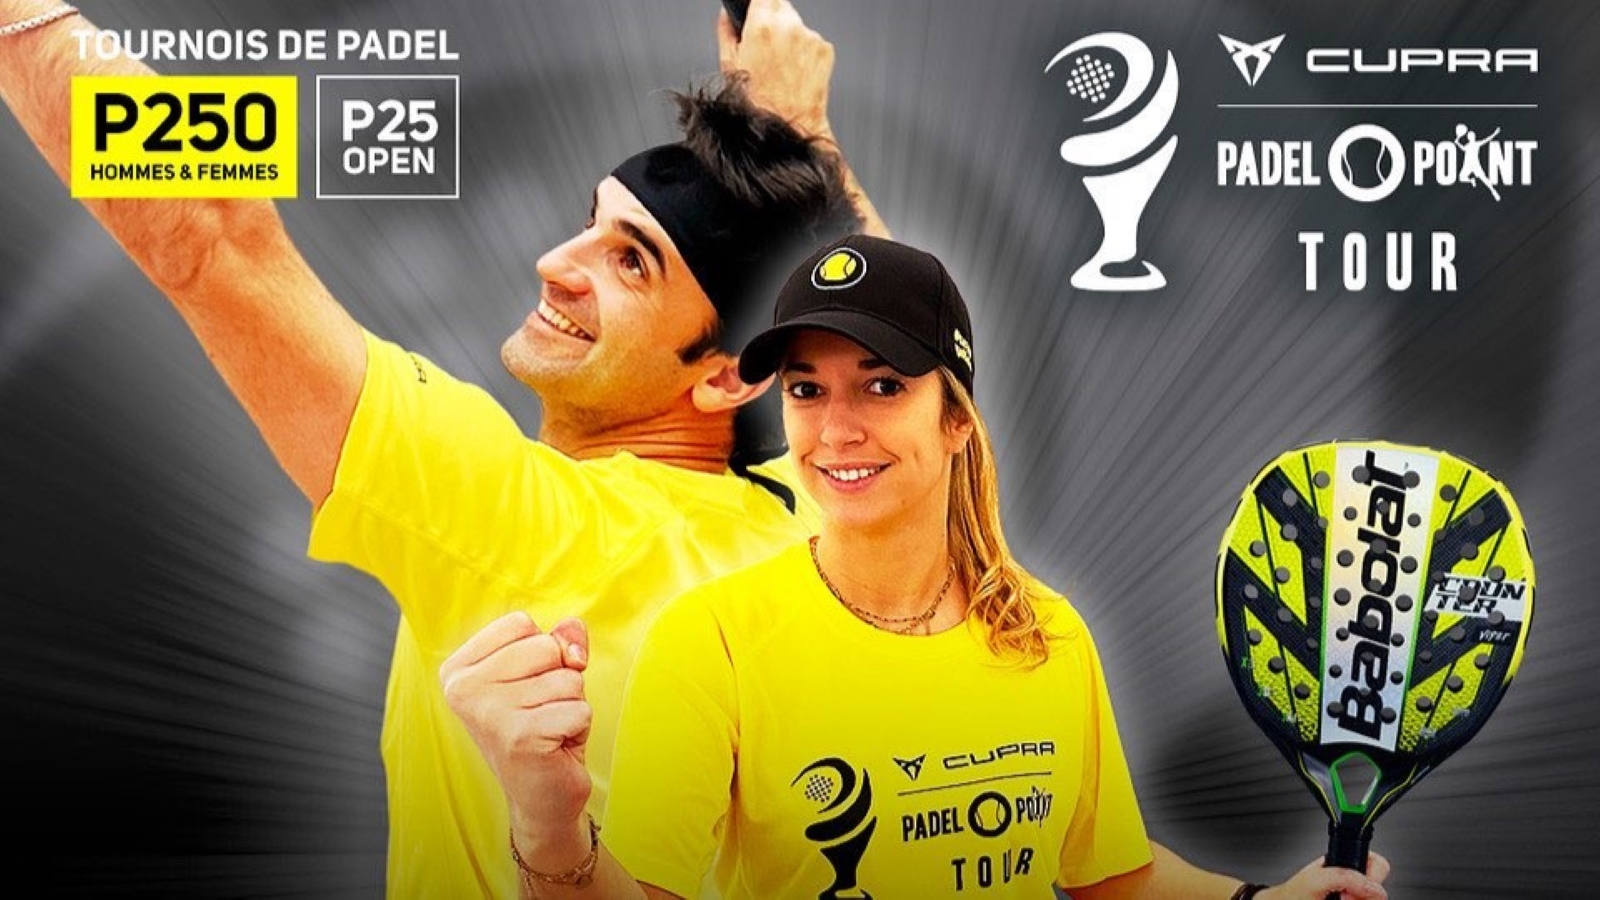 CUPRA PADEL POINT TOUR MONTPELLIER POSTER